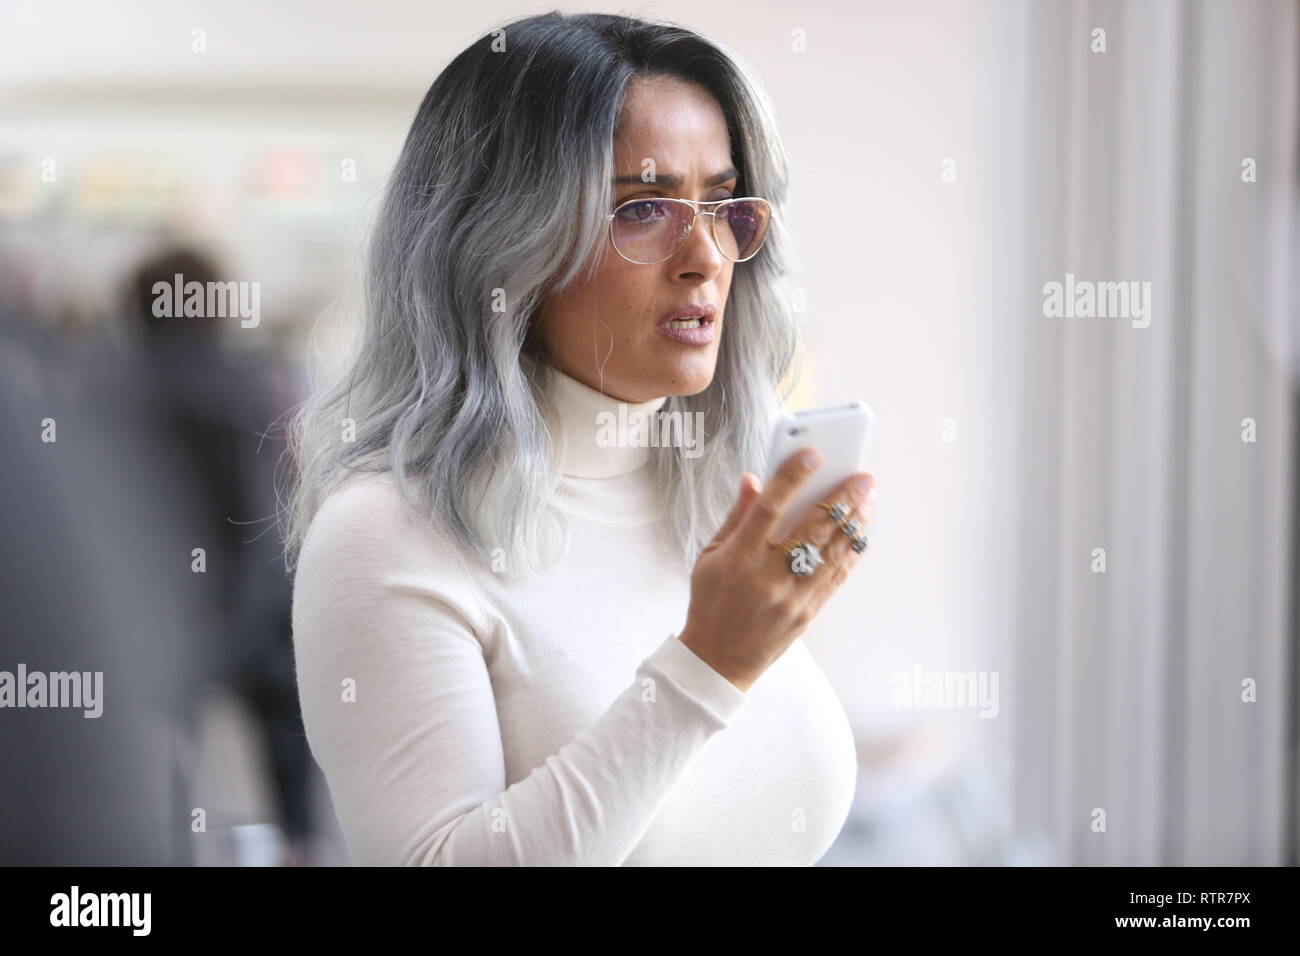 RELEASE DATE: March 15, 2019 TITLE: The Hummingbird Project STUDIO: The Orchard DIRECTOR: Kim Nguyen PLOT: A pair of high-frequency traders go up against their old boss in an effort to make millions in a fiber-optic cable deal. STARRING: SALMA HAYEK as Eva Torres. (Credit Image: © The Orchard/Entertainment Pictures) Stock Photo